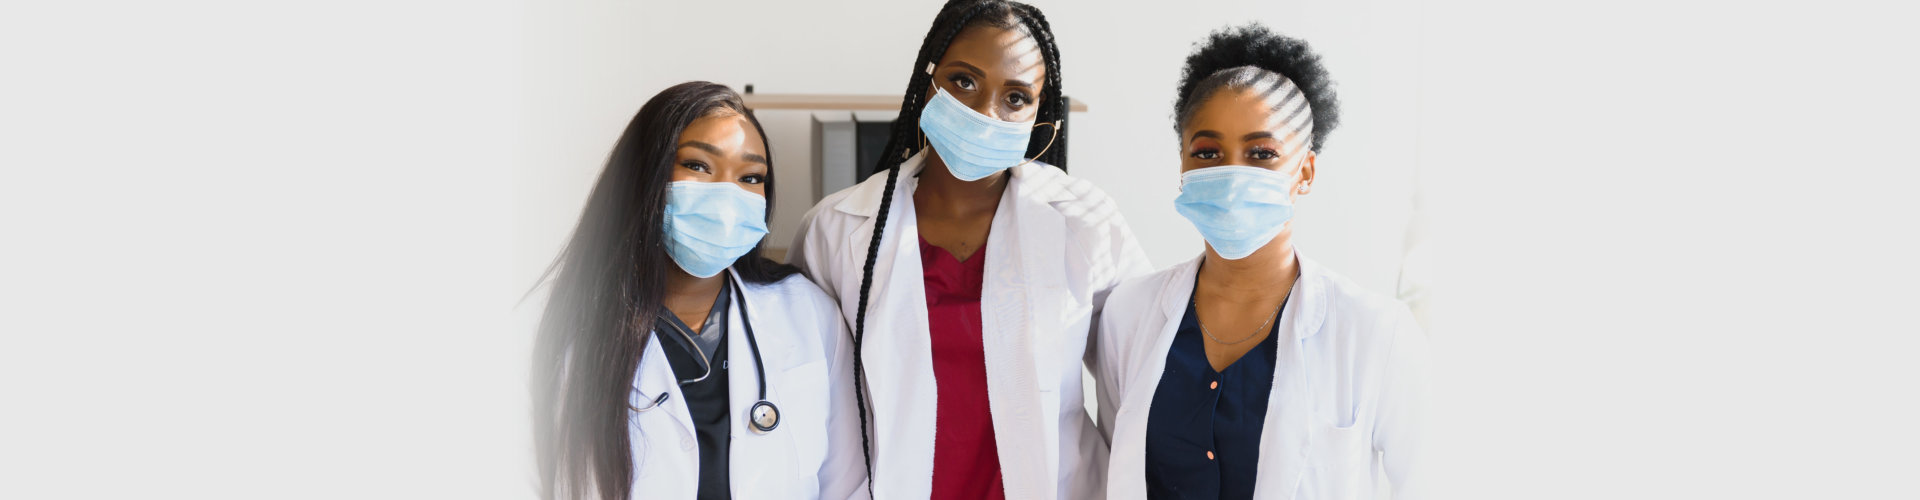 Group of African American female doctors in protective masks on their faces